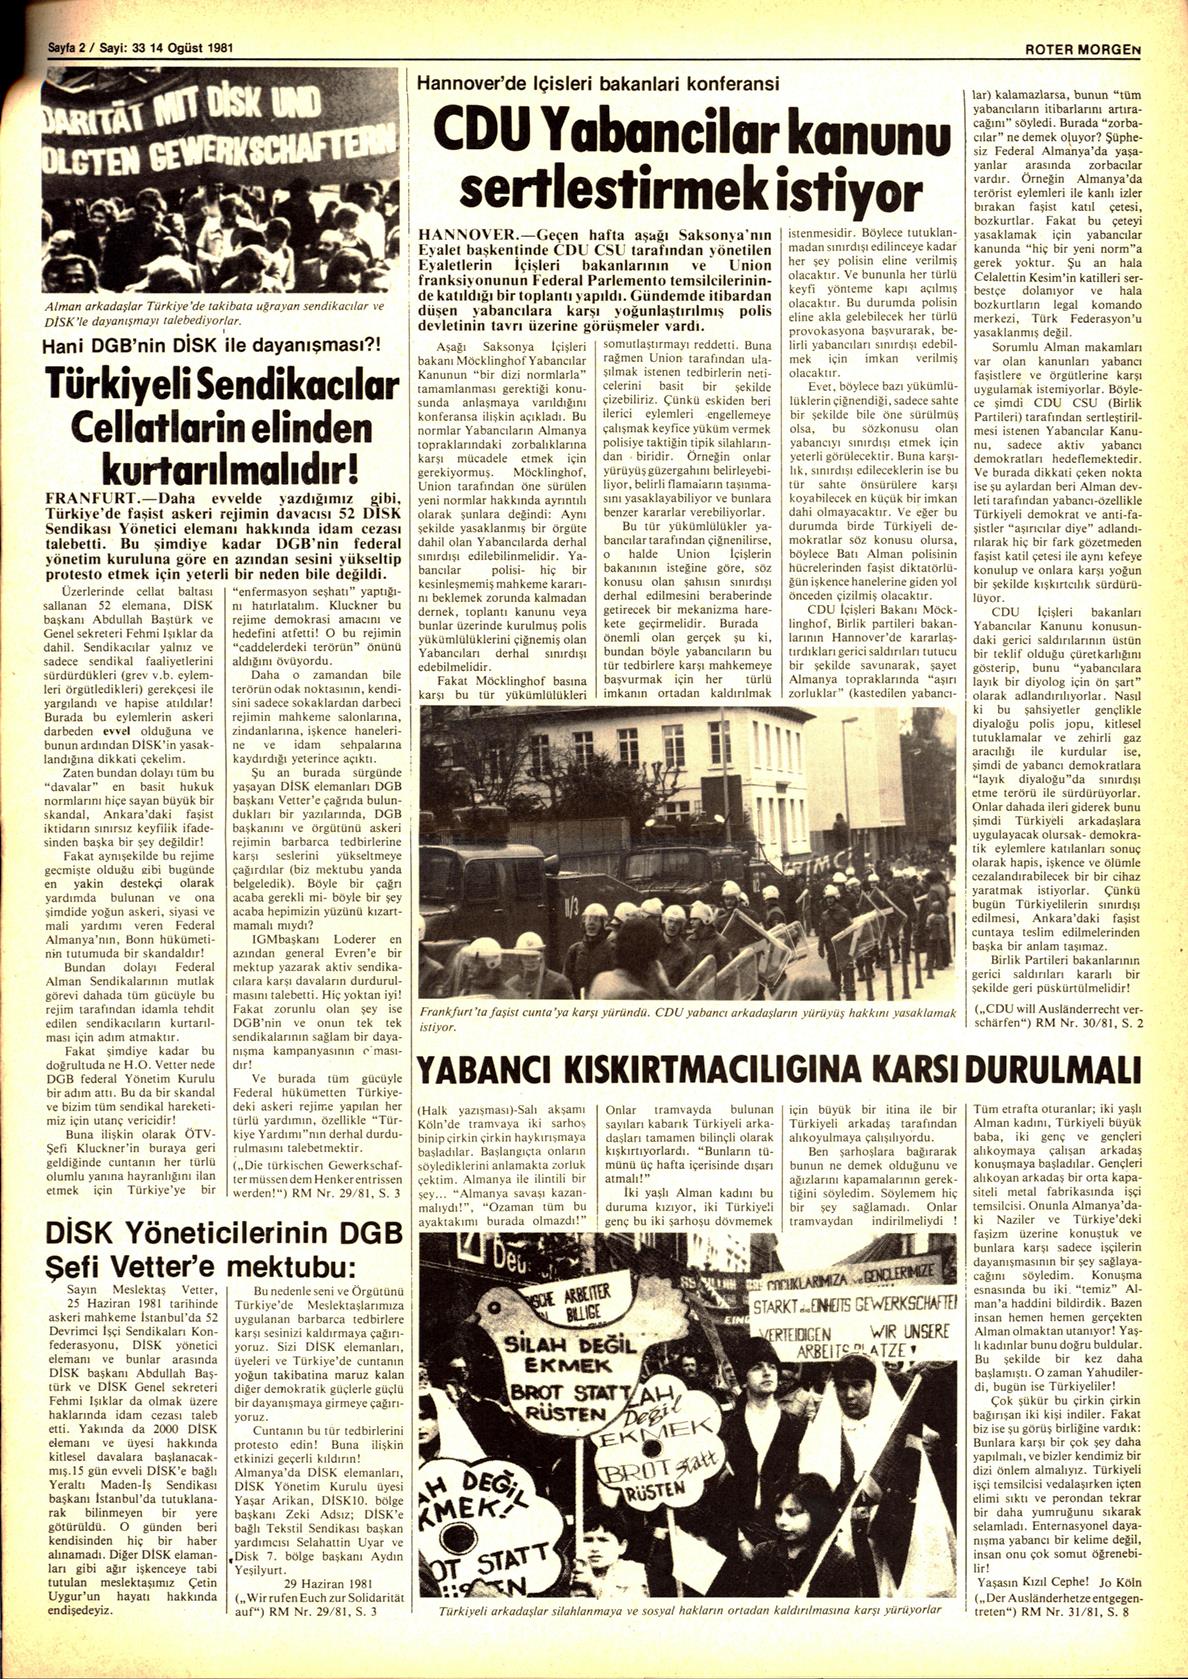 Roter Morgen, 15. Jg., 14. August 1981, Nr. 33, Seite 15